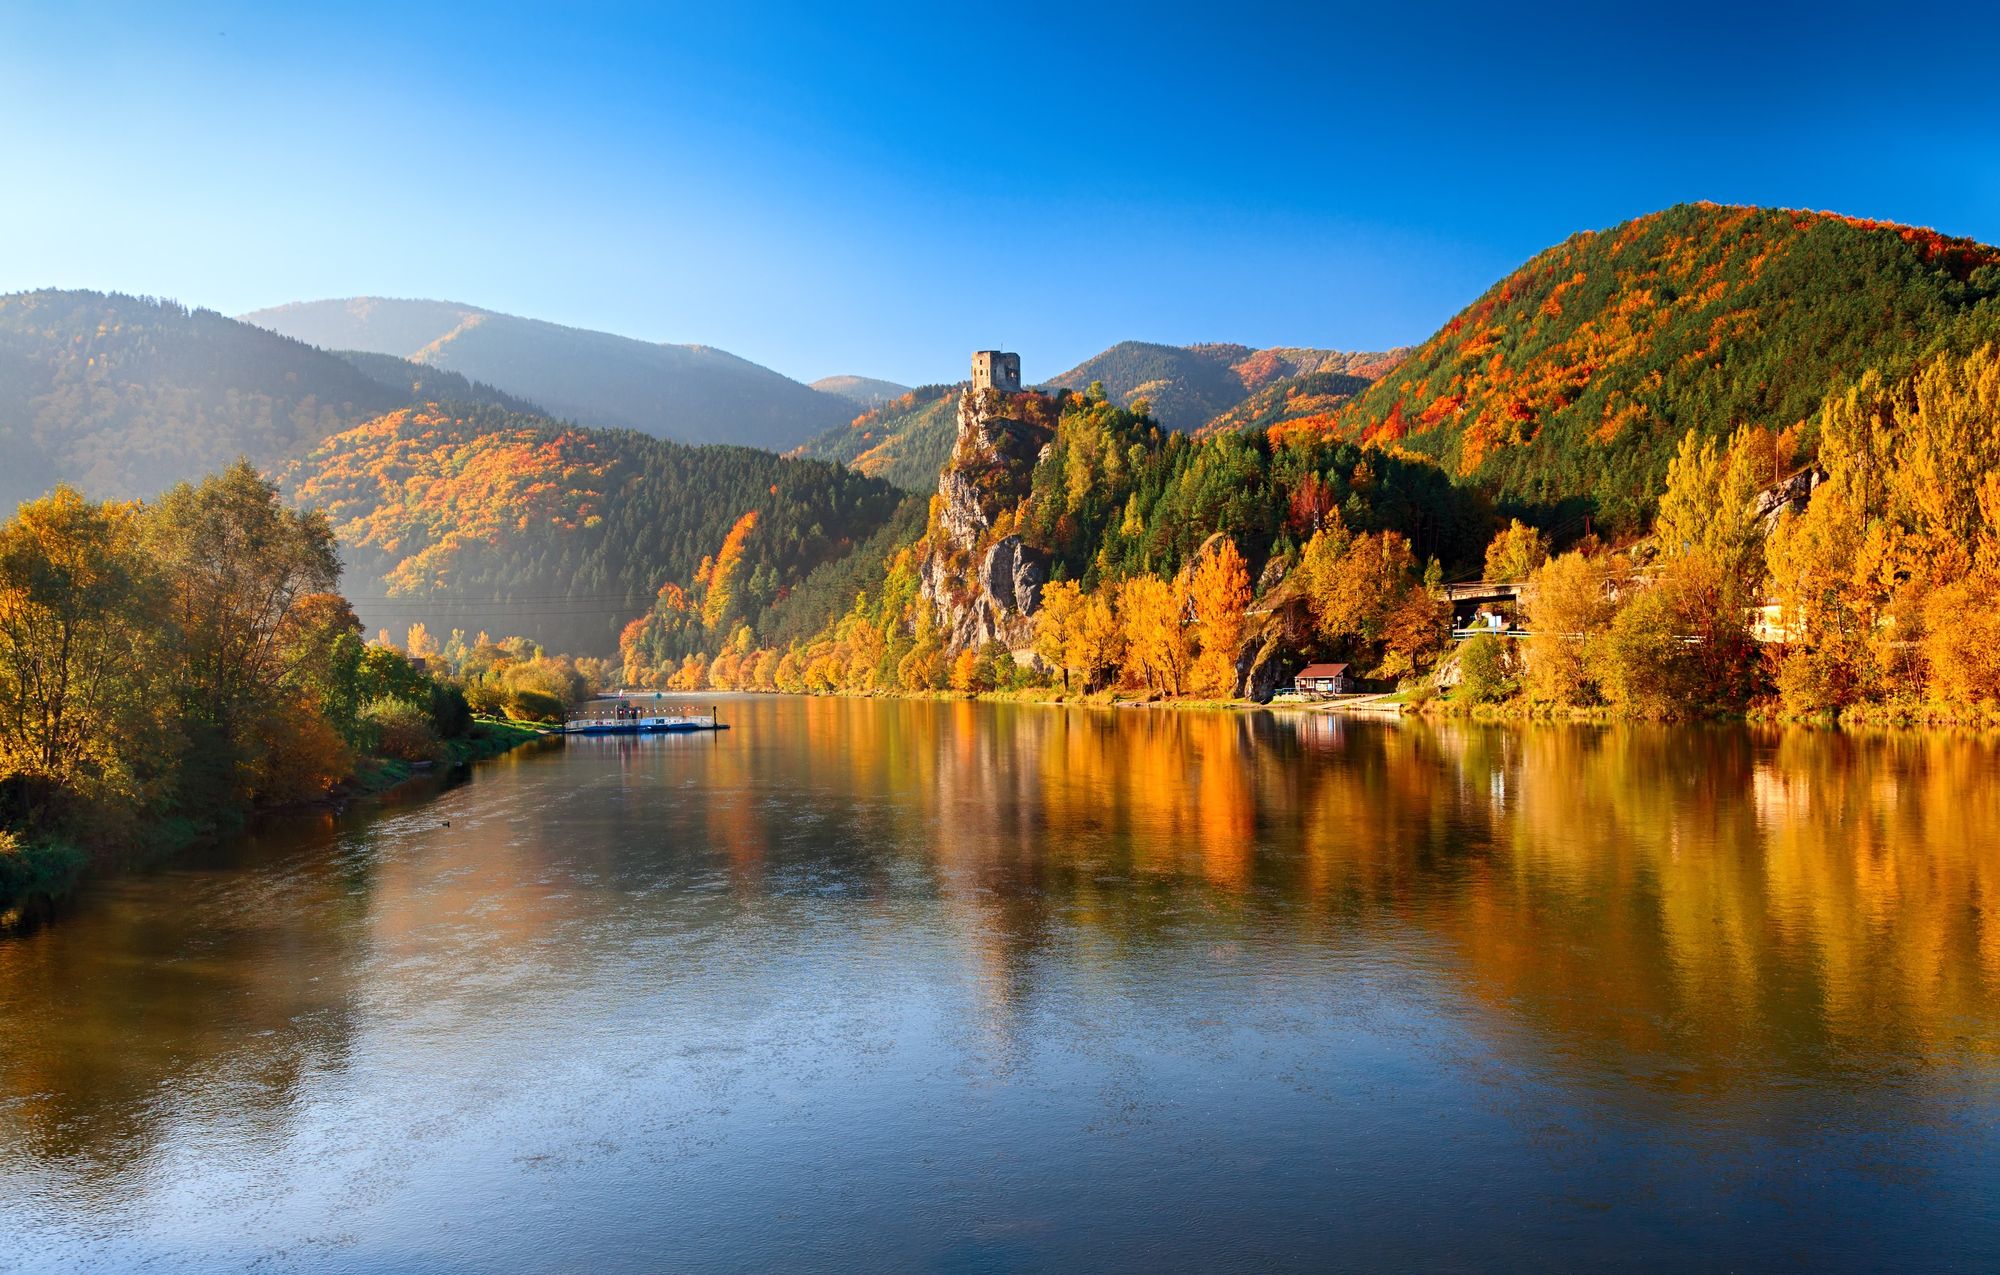 6 Reasons Why Slovakia is the Next Big Thing